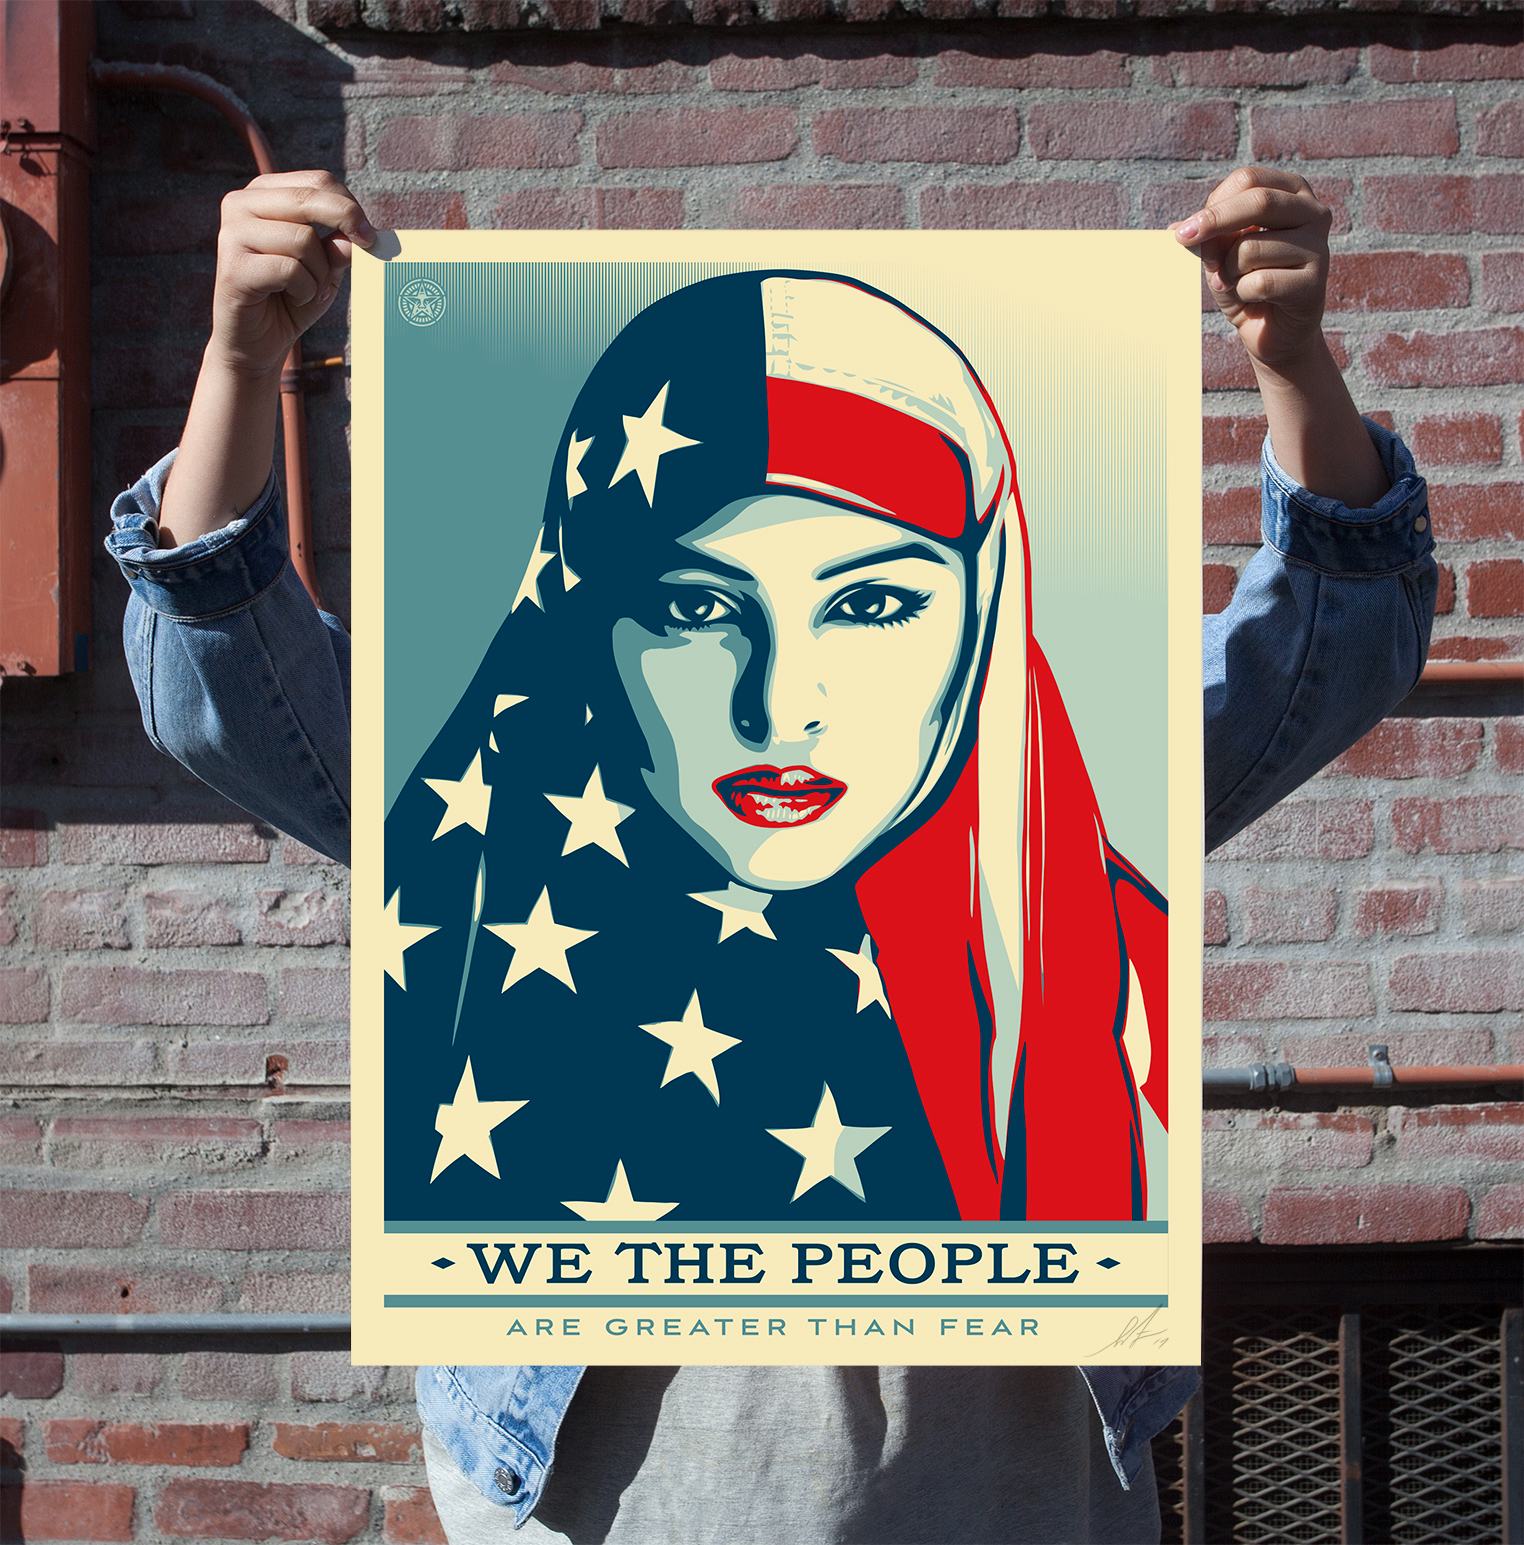 Life gives us the people. Шепард Фейри Обама. Шепард Фейри стрит арт. We the people Shepard Fairey. Шепард Фейри we are people.